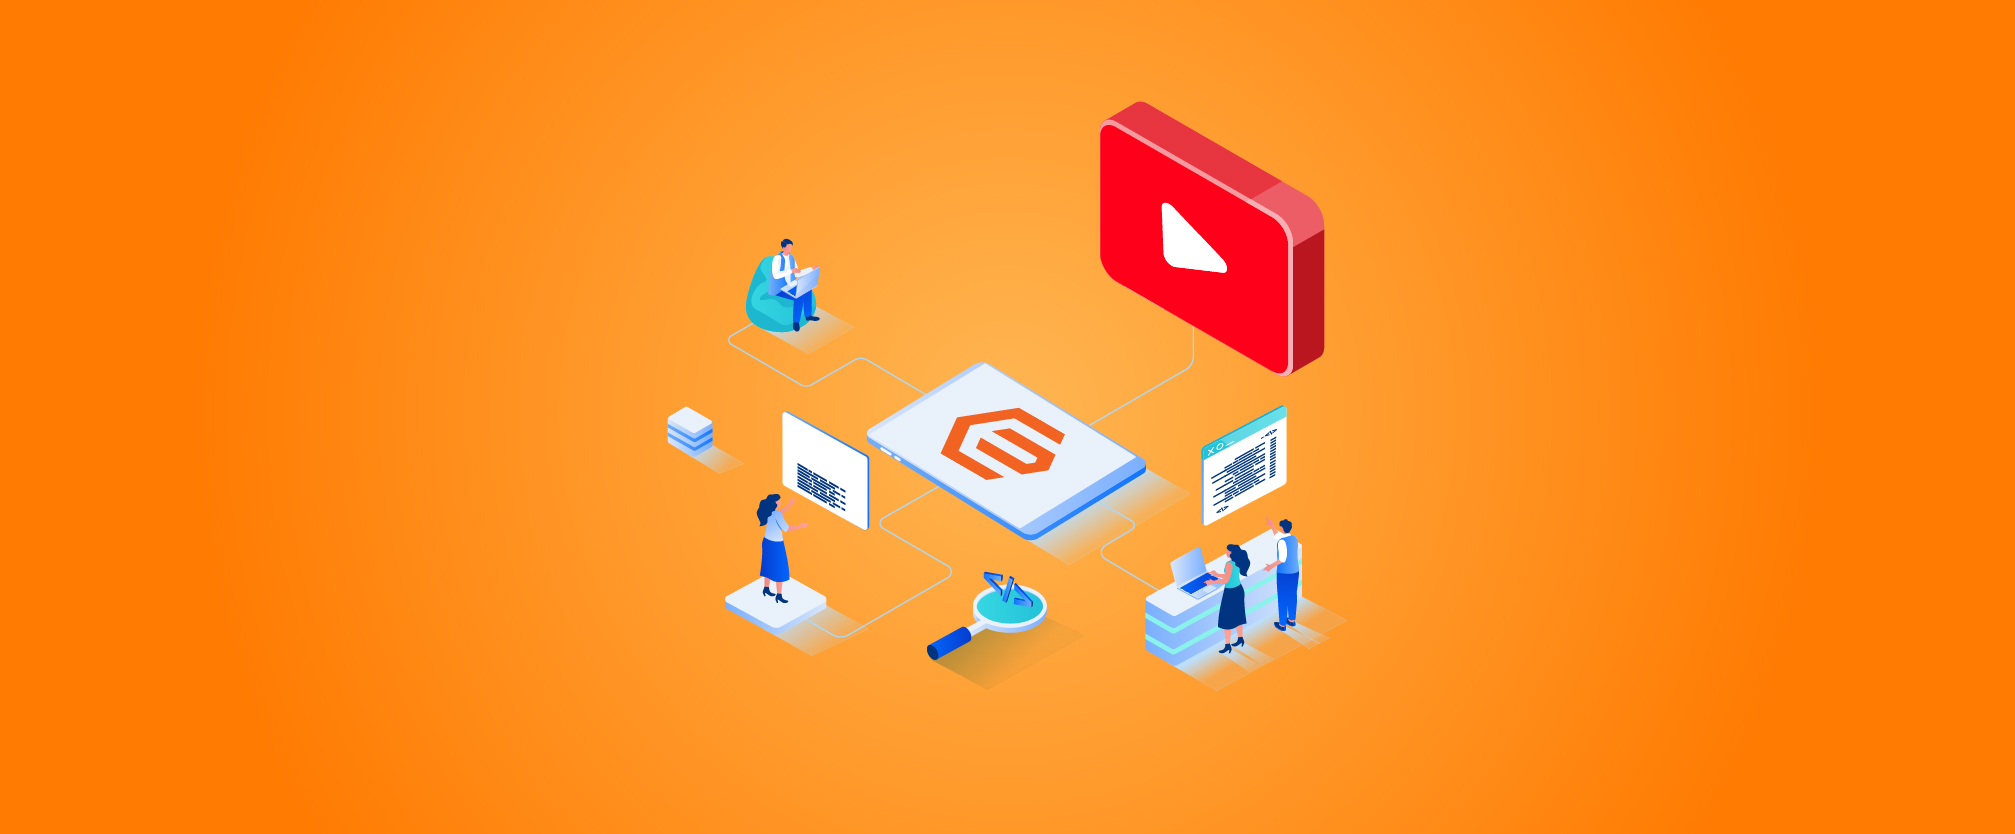 beehexa blog 10 best youtube channels to learn magento150x 100